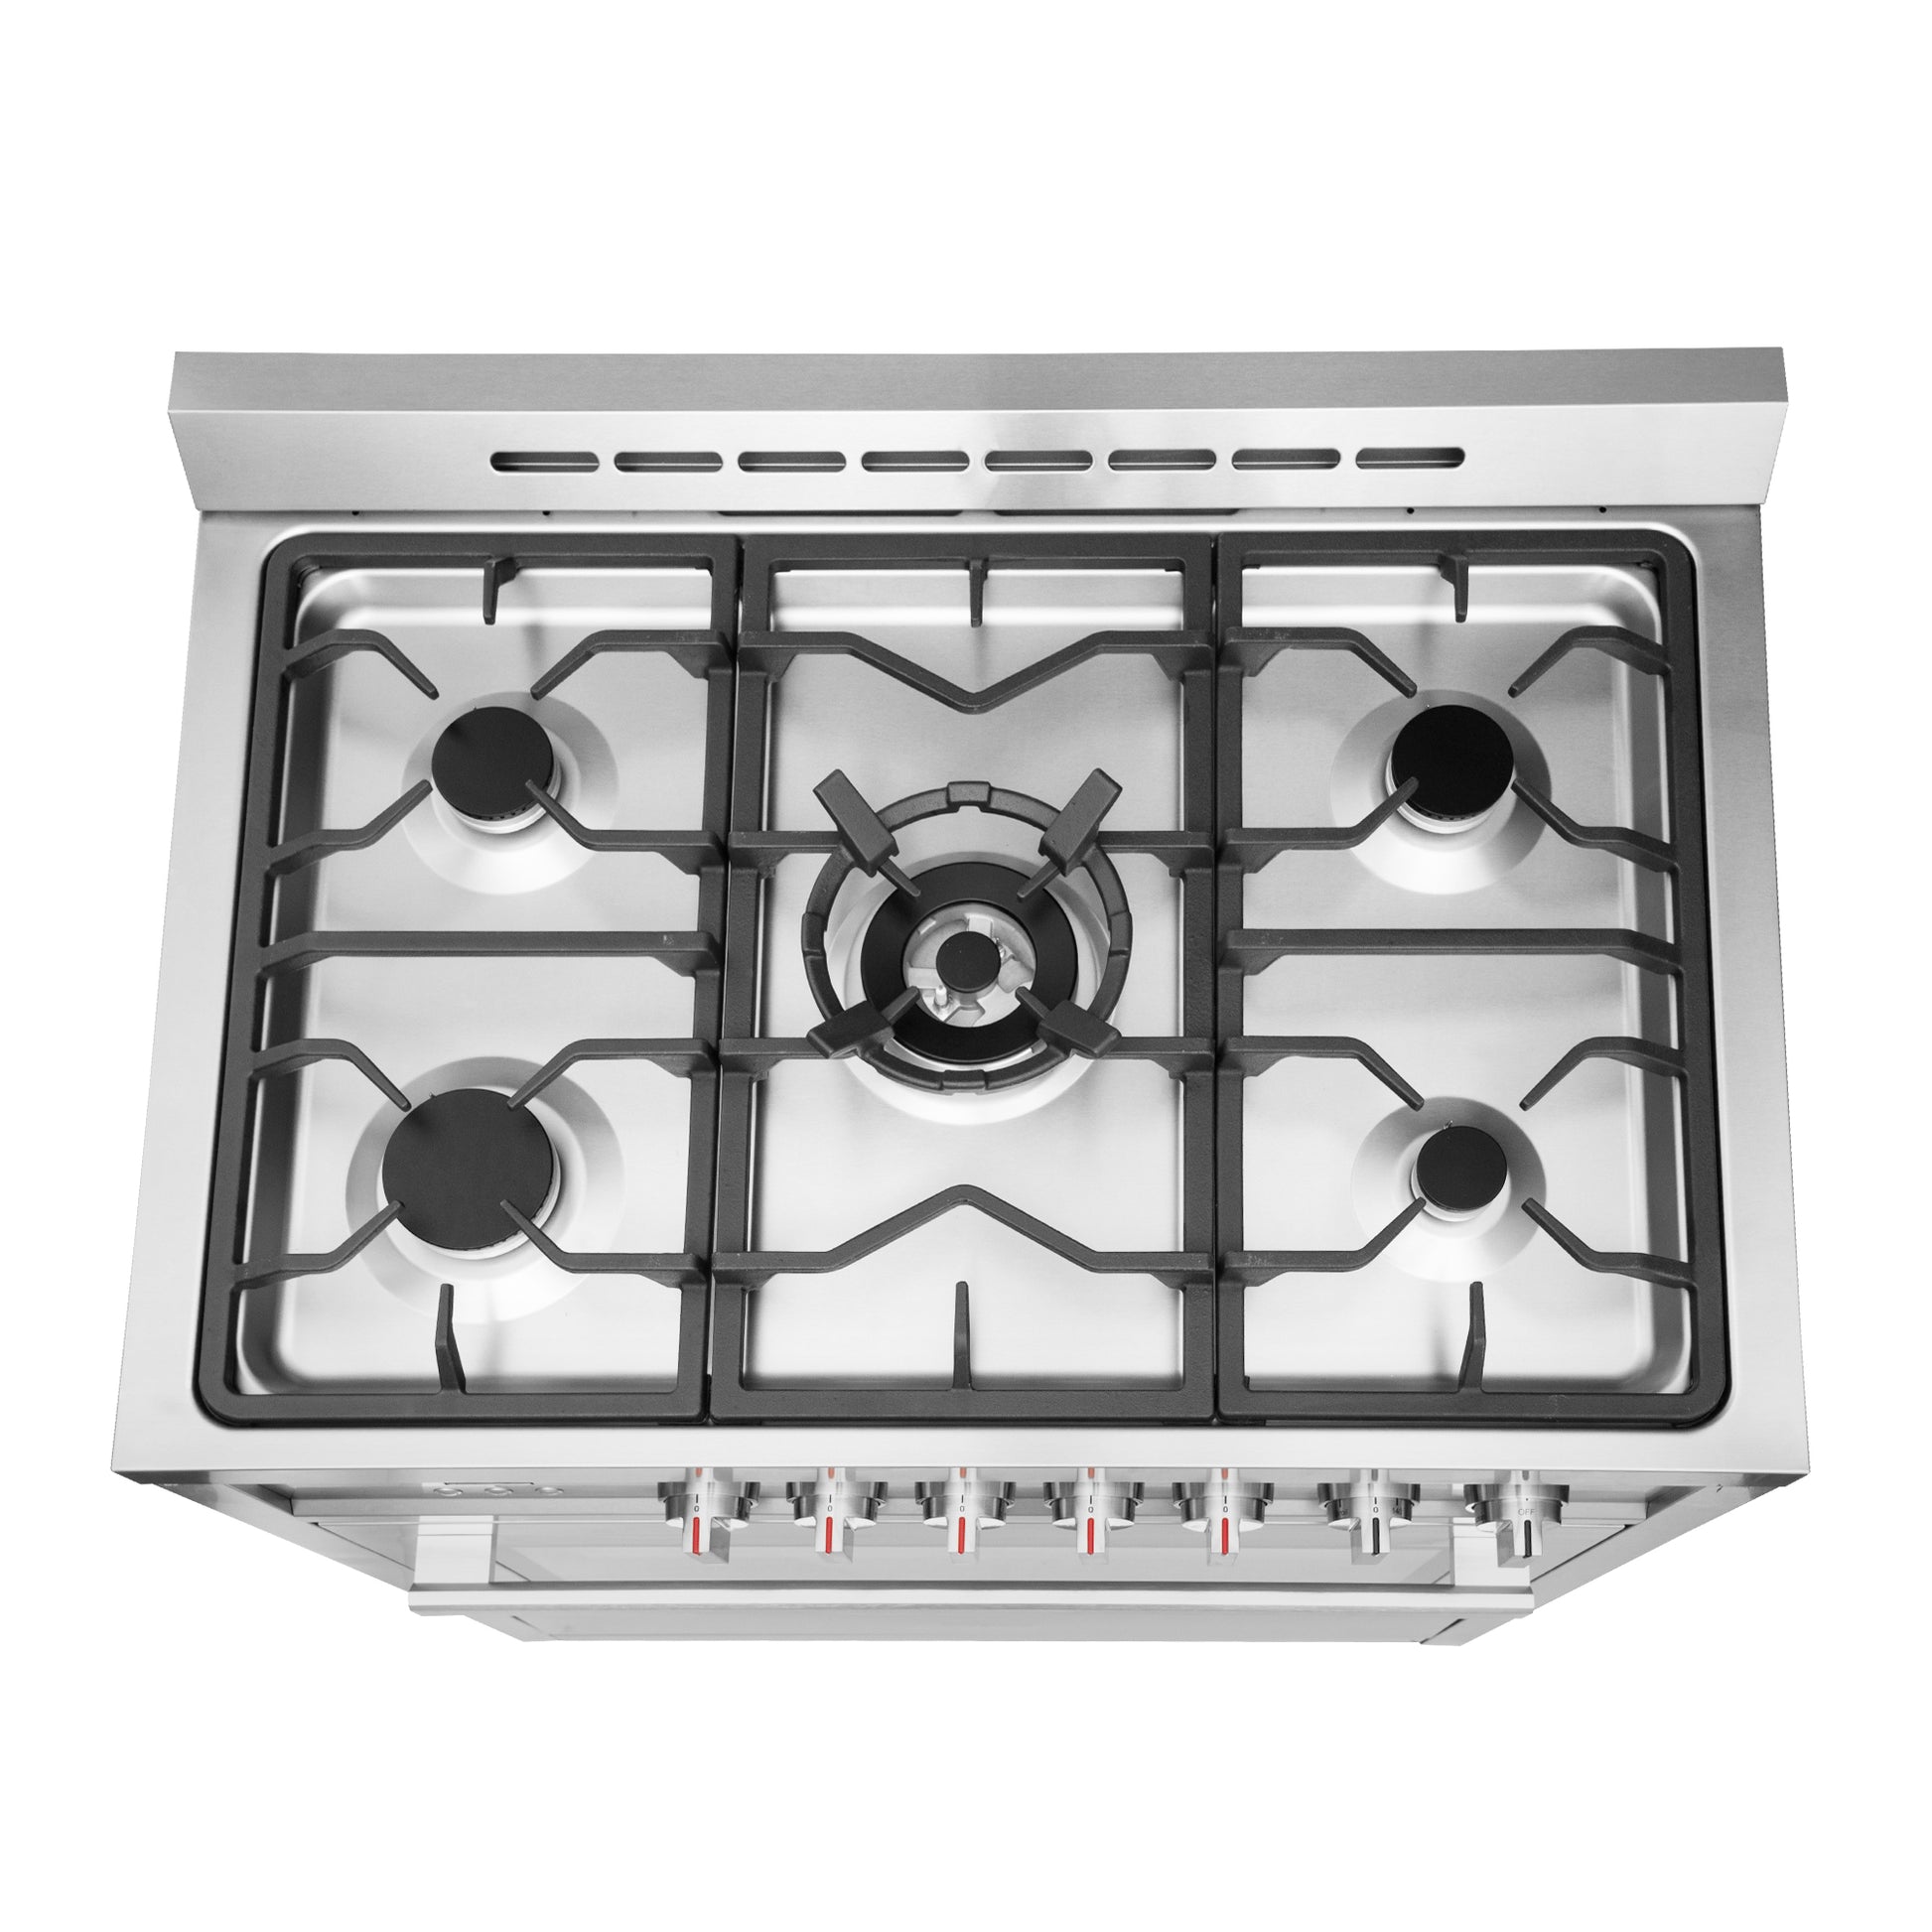 Cosmo 36 in. 3.8 cu. ft. Single Oven Gas Range in Stainless Steel with 5 Burner Cooktop and Cast Iron Grates